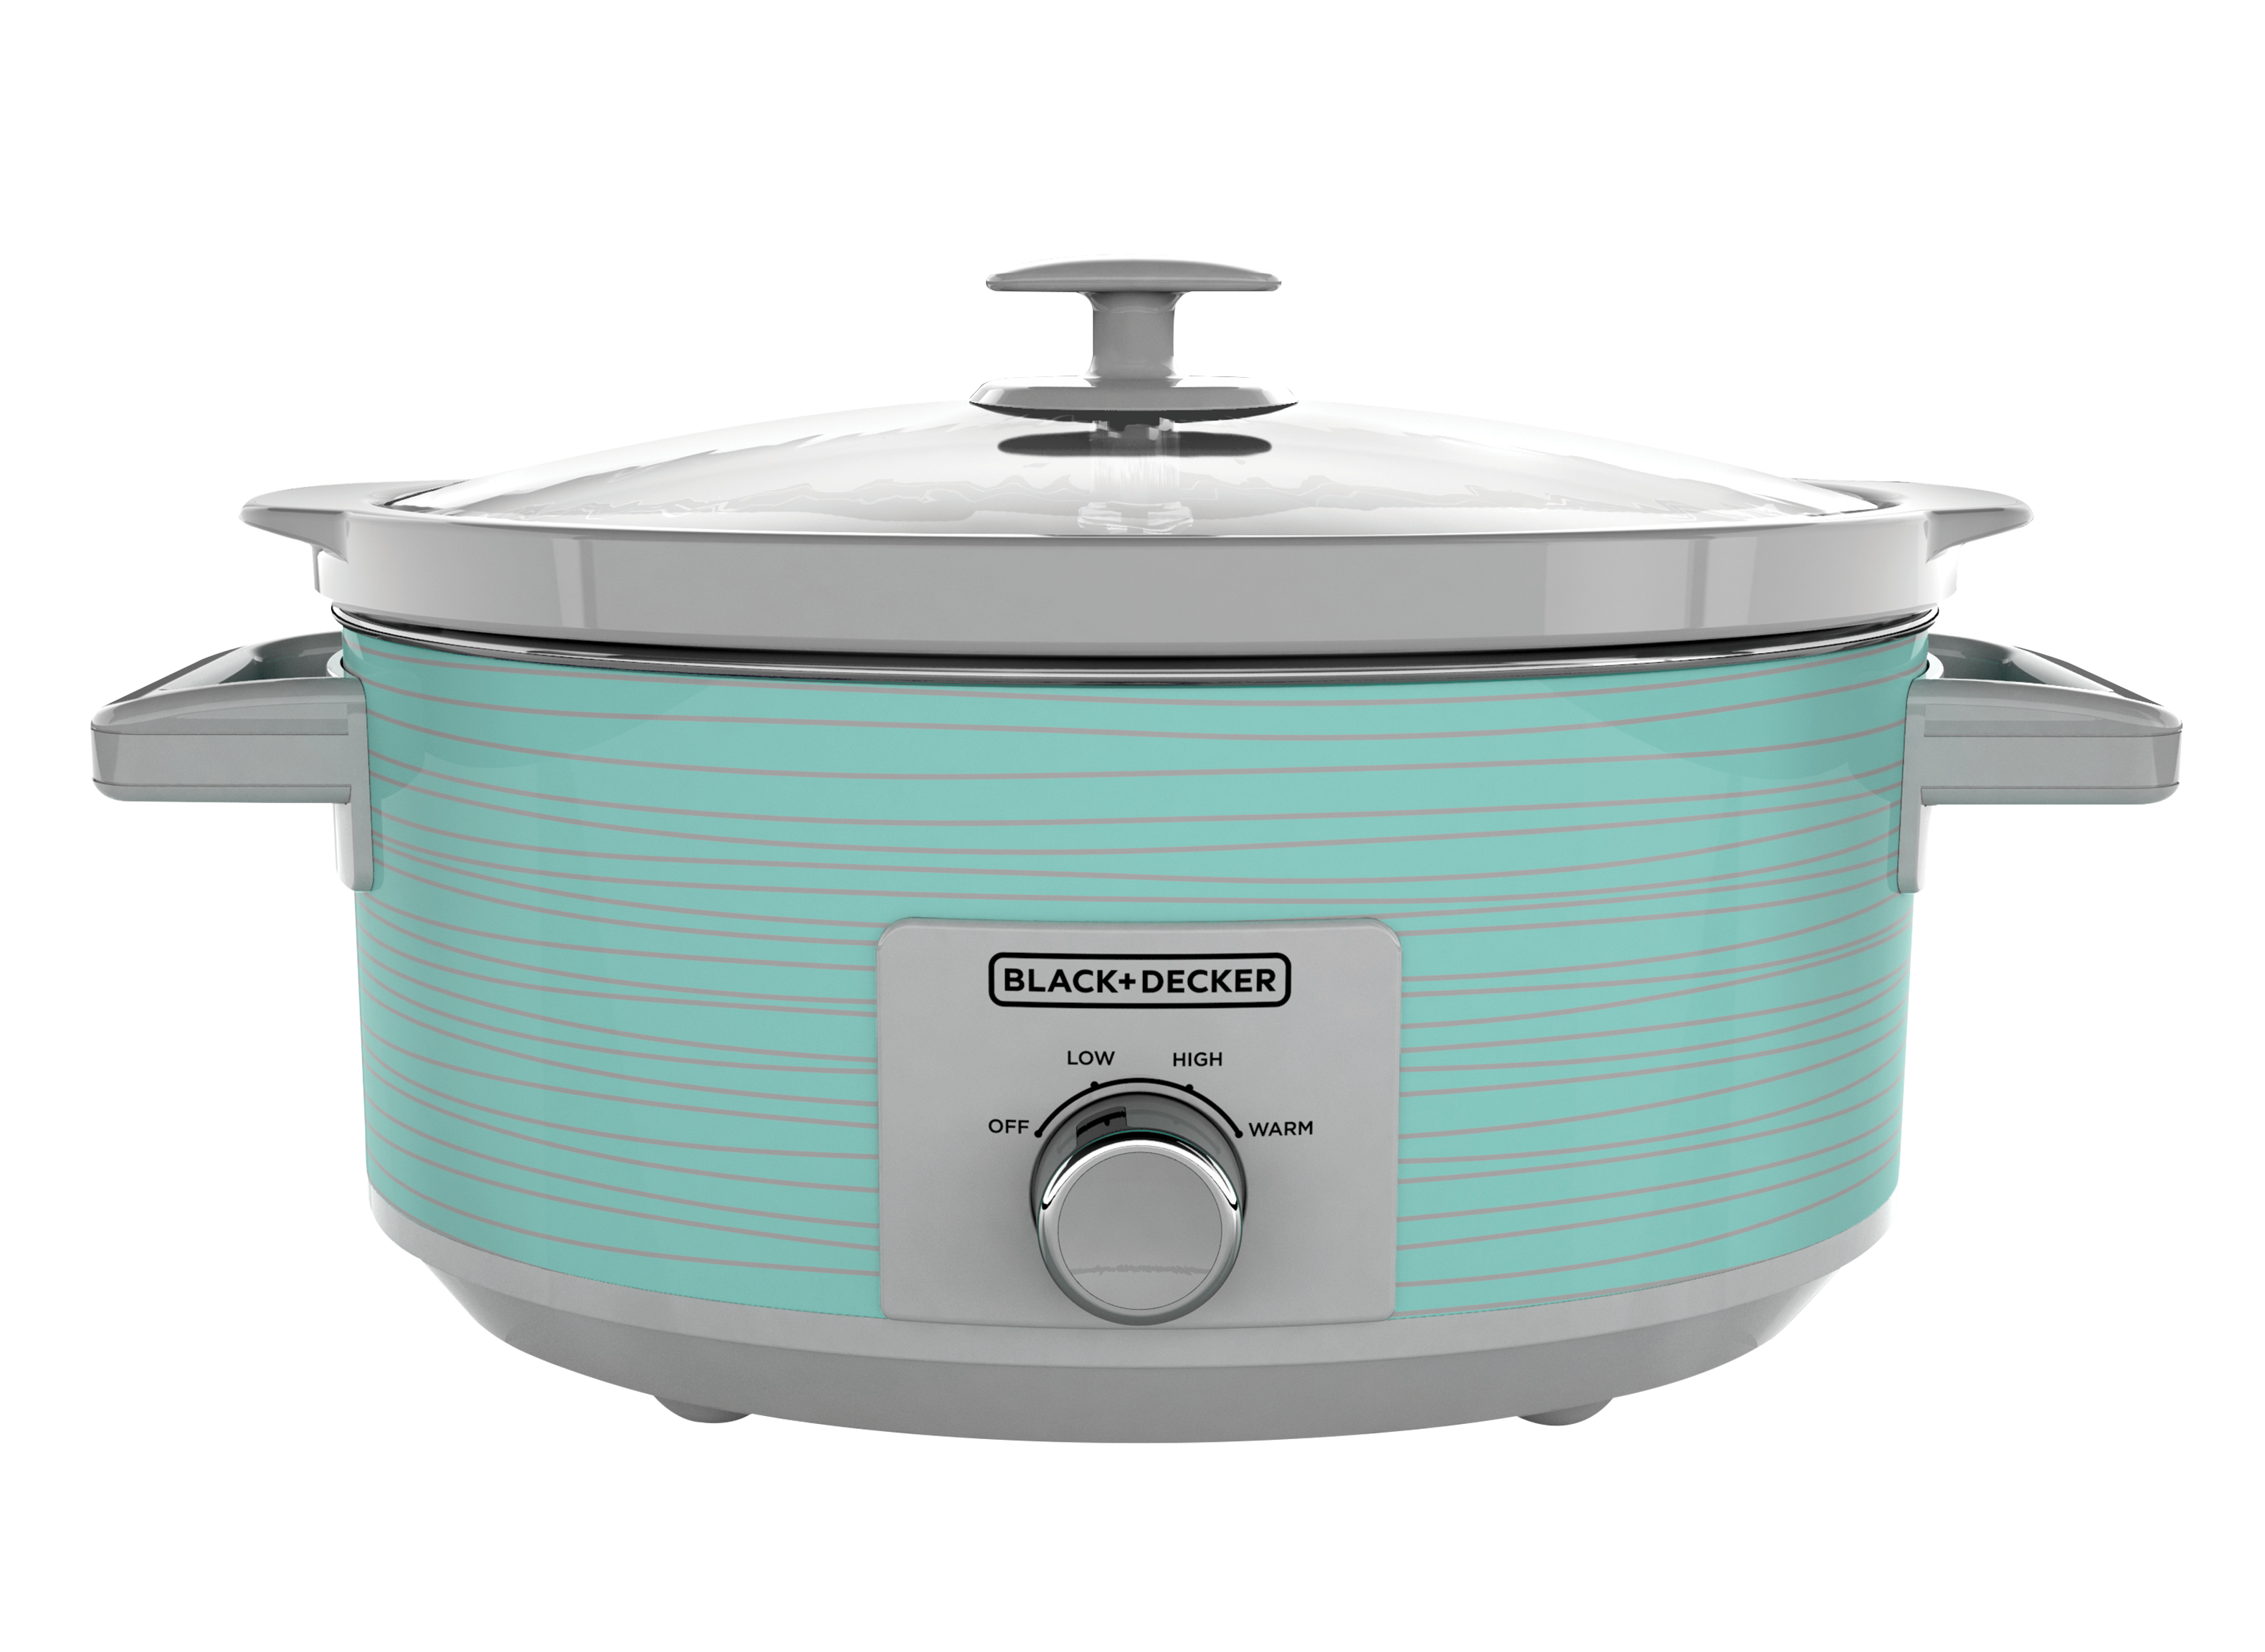 https://crdms.images.consumerreports.org/prod/products/cr/models/397830-slow-cookers-black-decker-teal-wave-7-qt-dial-control-sc2007d-10003439.png